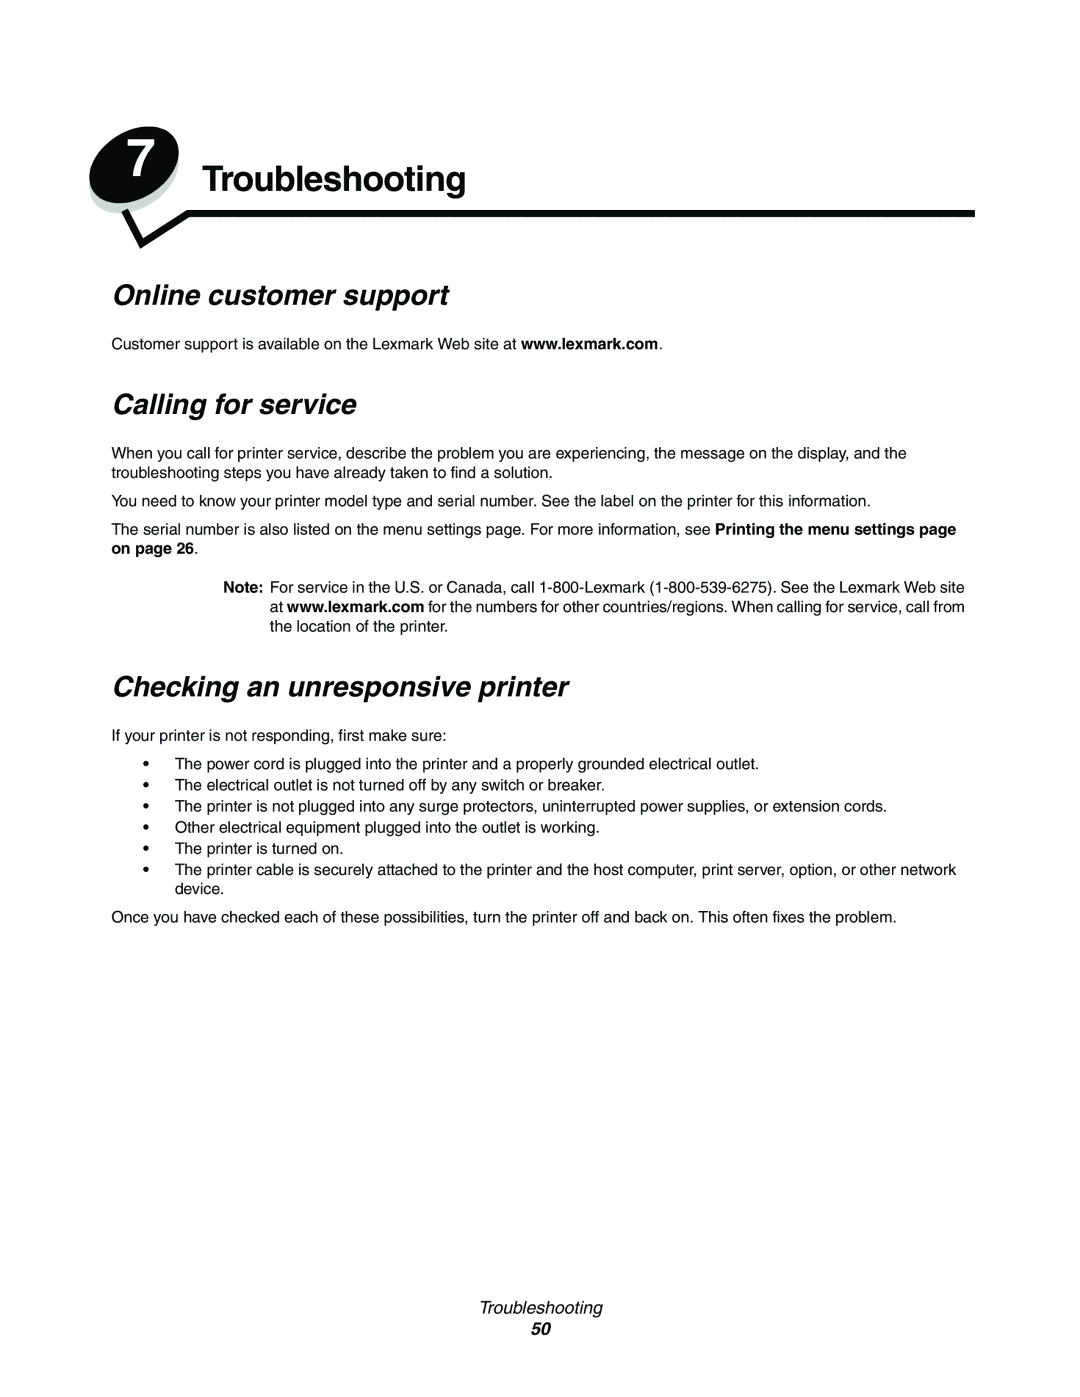 Lexmark E352DN manual Troubleshooting, Online customer support Calling for service, Checking an unresponsive printer 